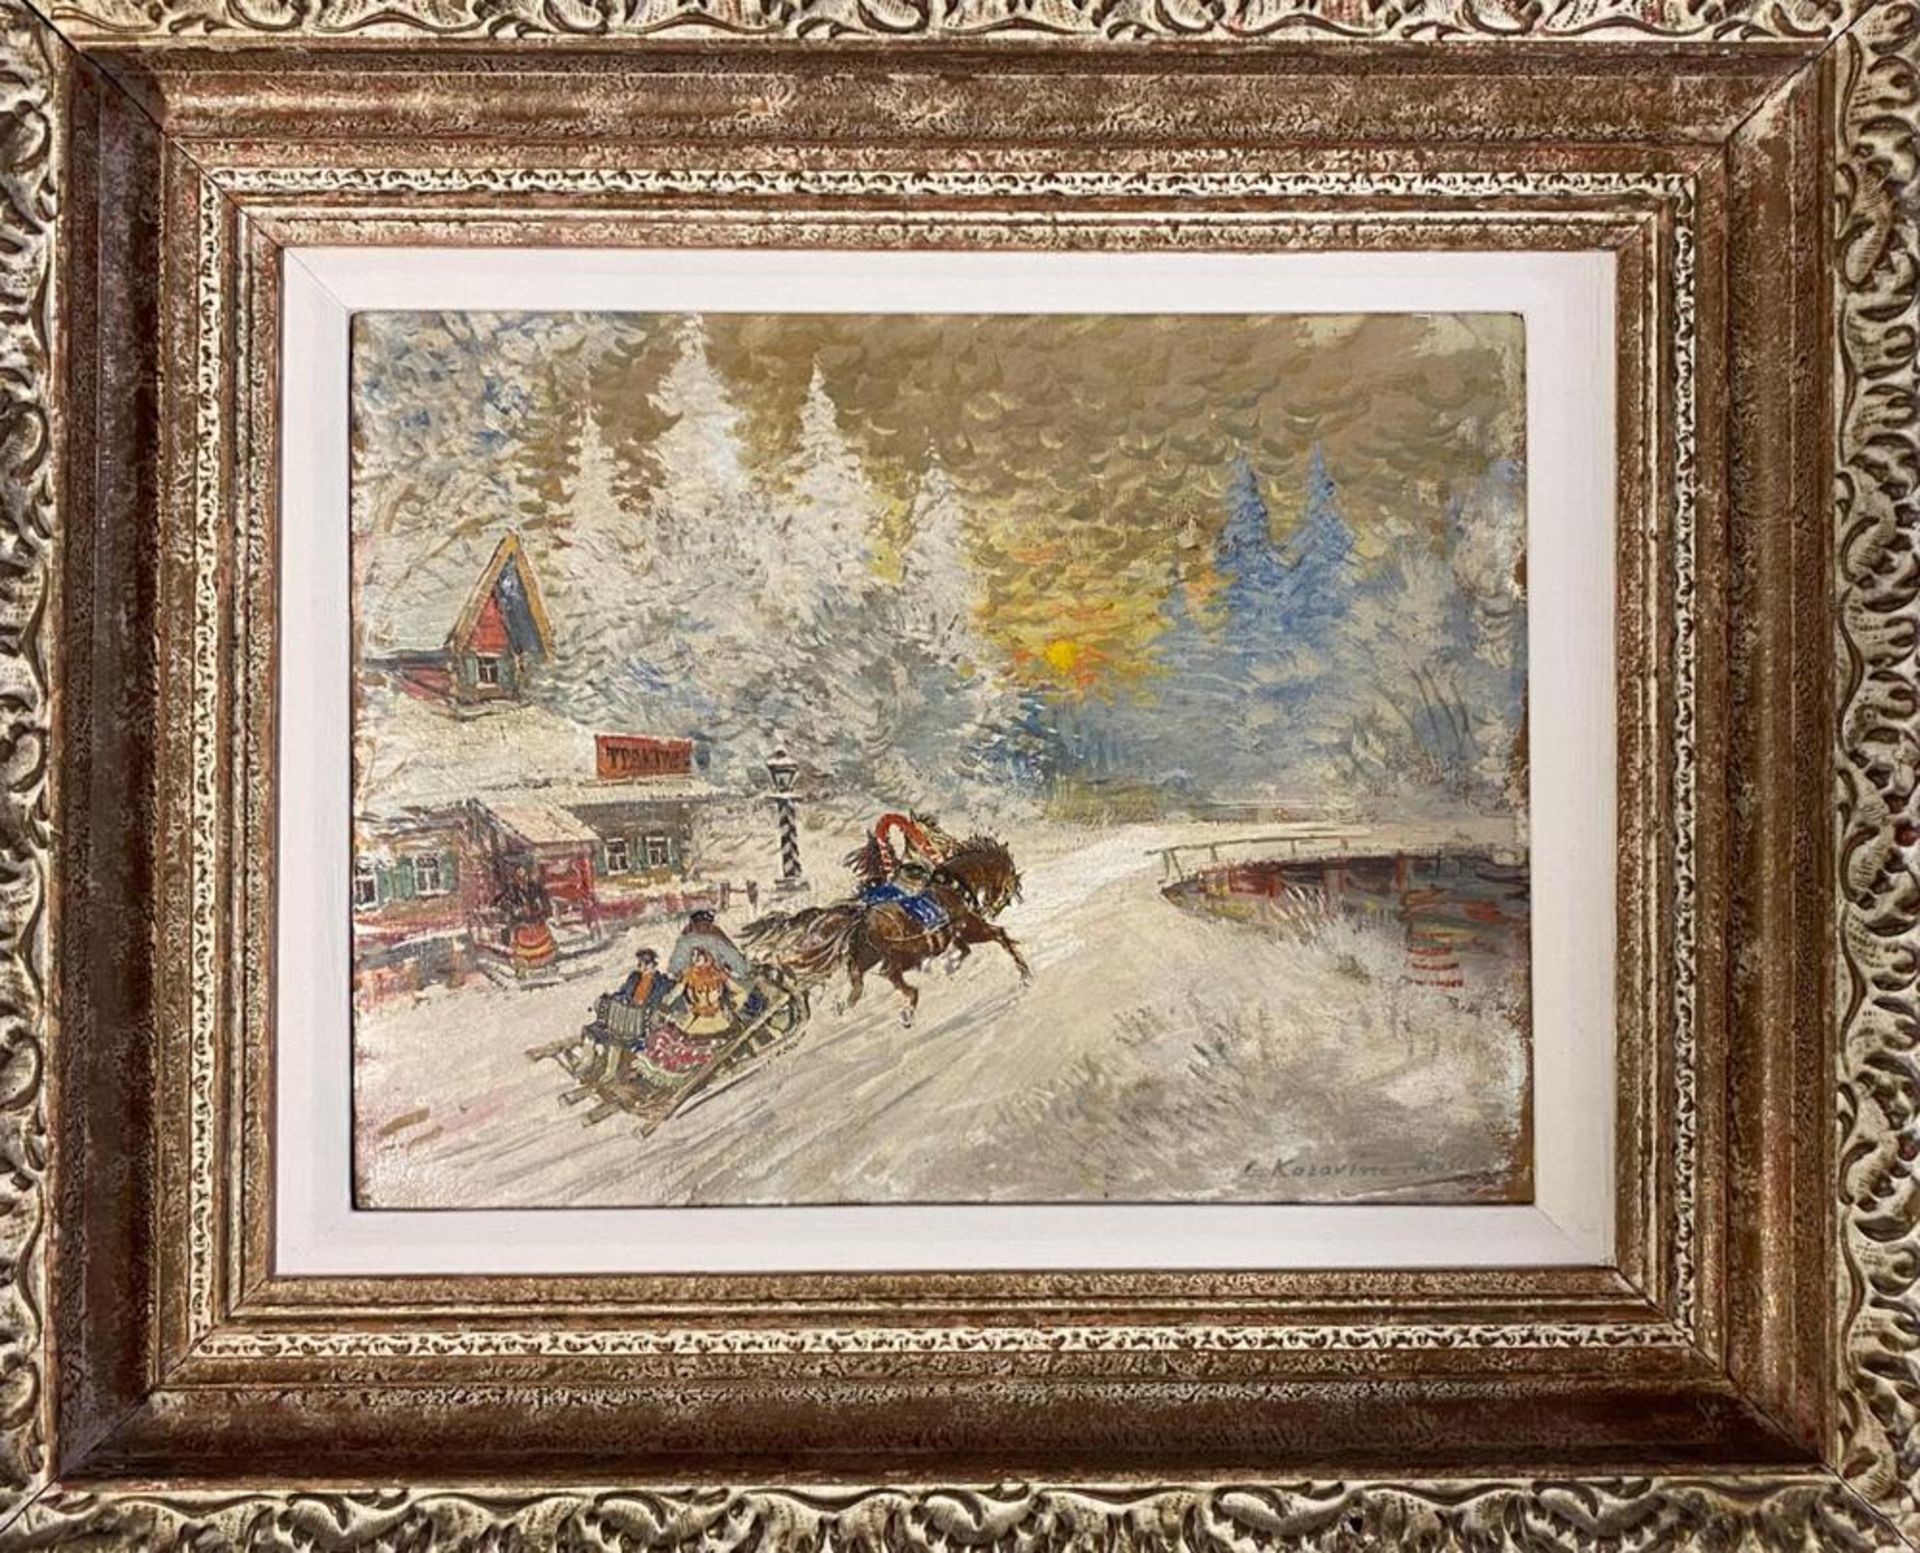 KONSTANTIN KOROVIN (1861-1939) A Sleigh Ride Through the Village - signed and [...] - Image 3 of 5